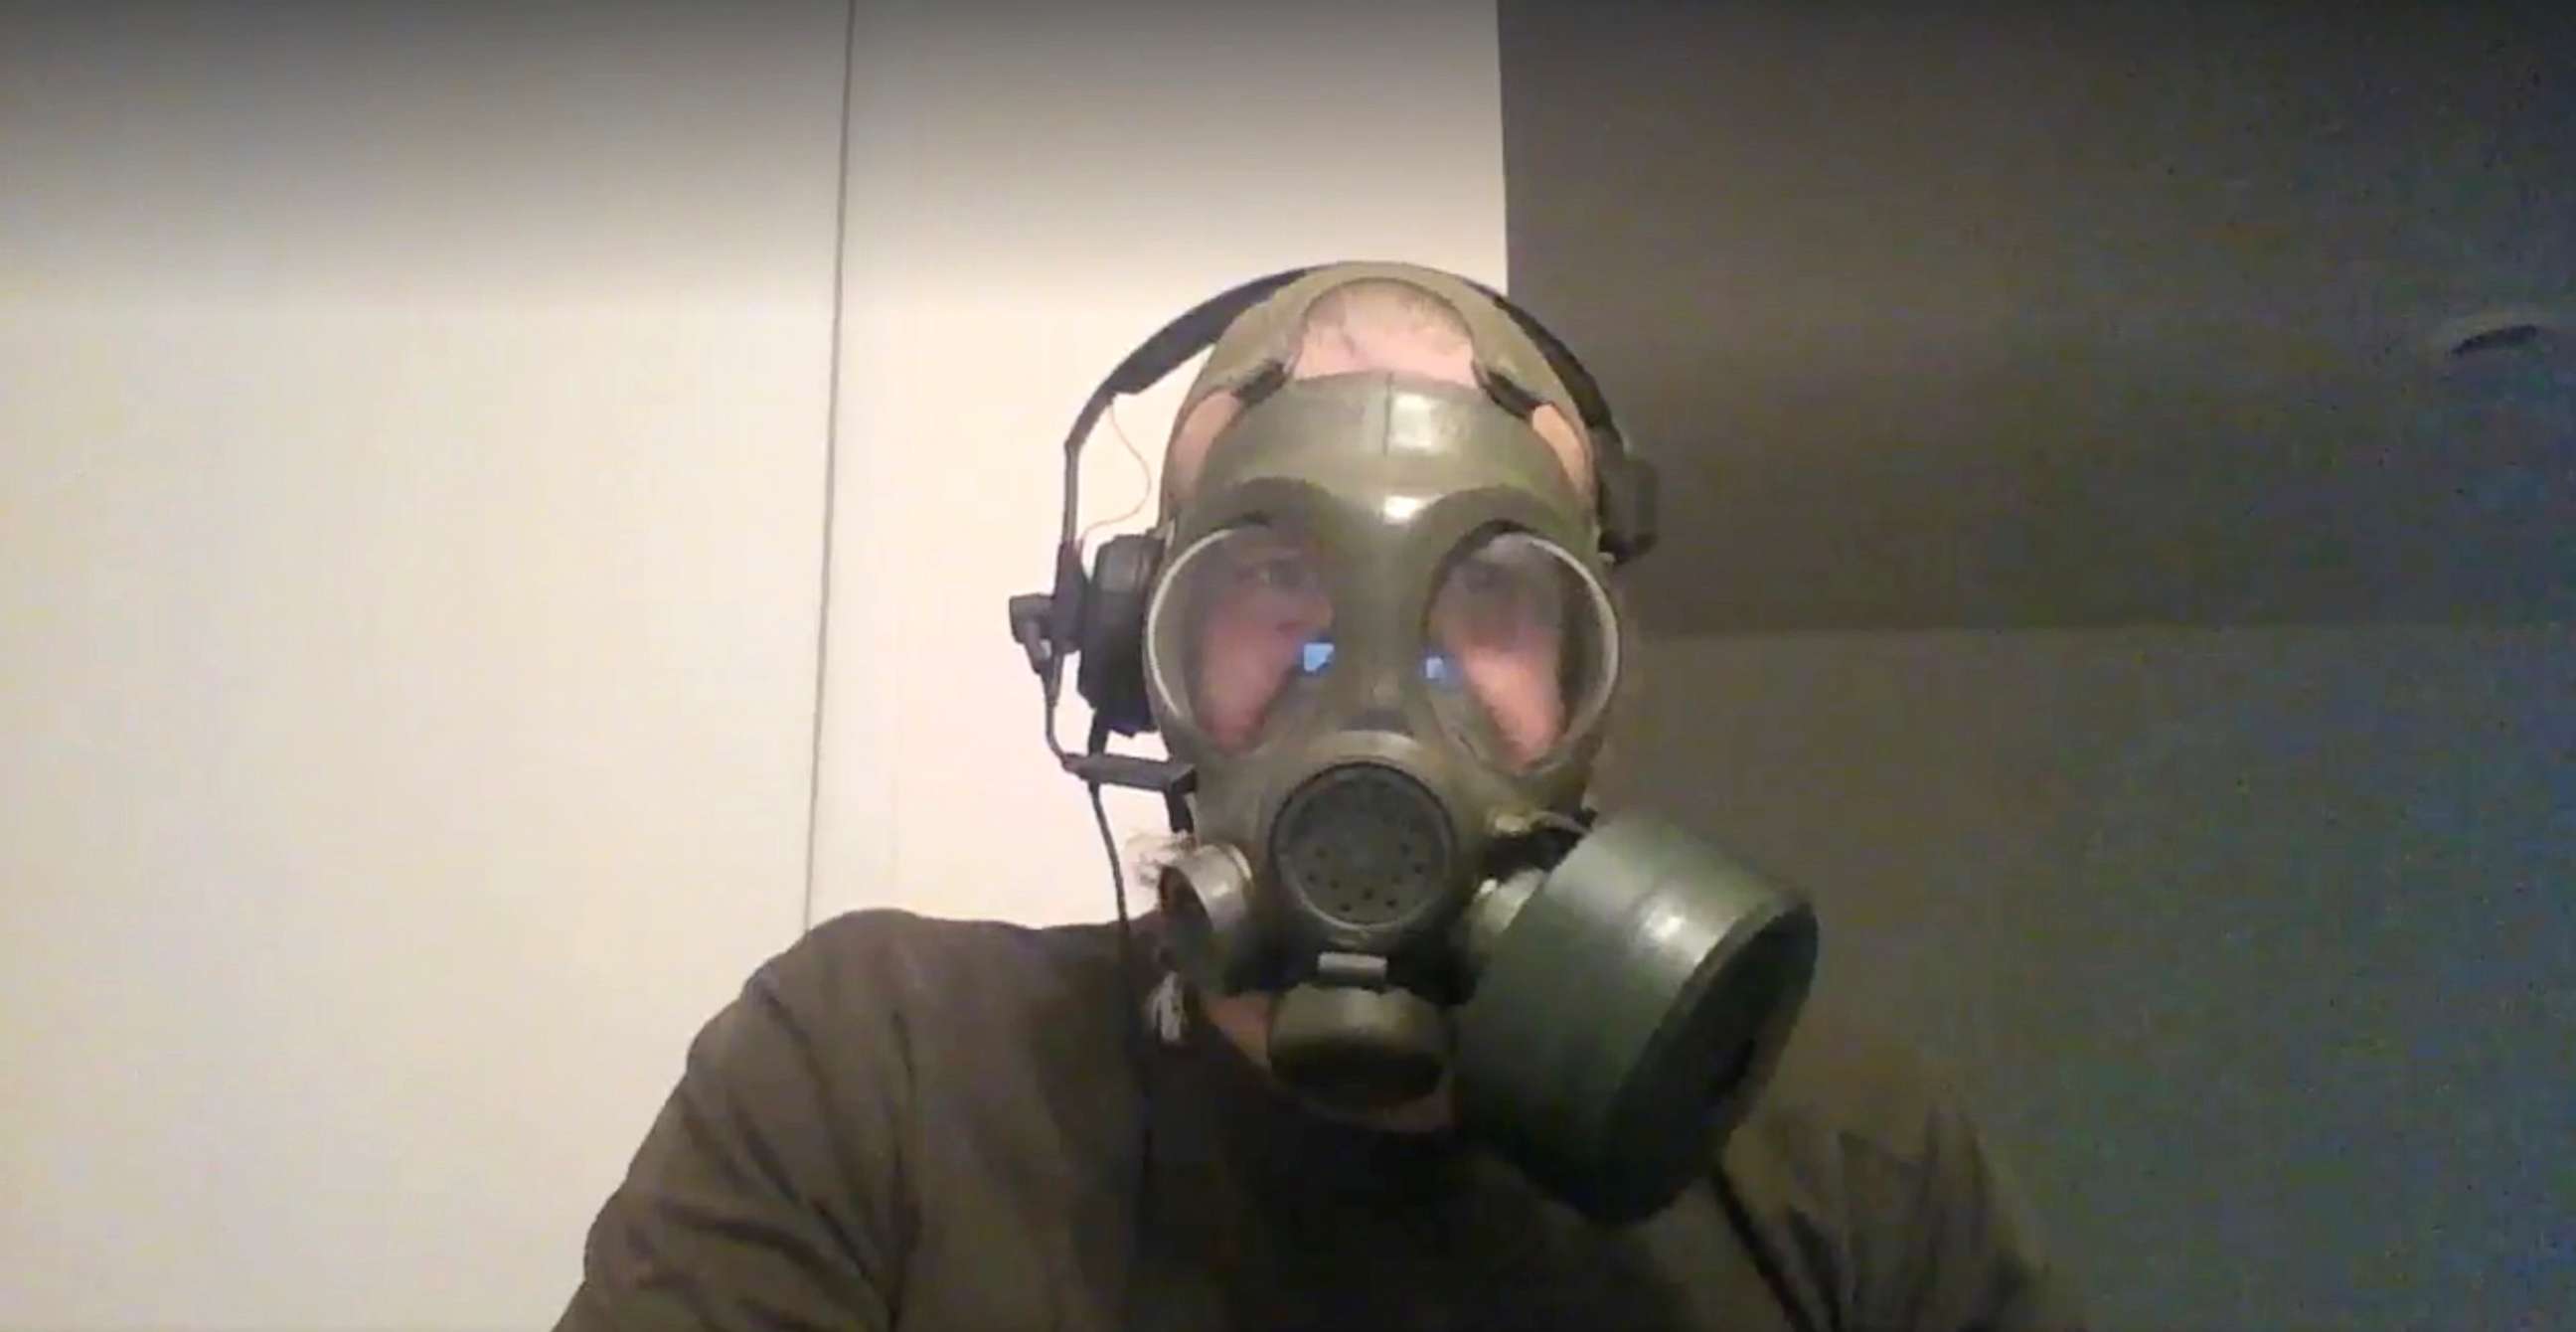 PHOTO: Patrik Matthews seen in a gas mask in an undated photo provided to ABC News by the FBI.